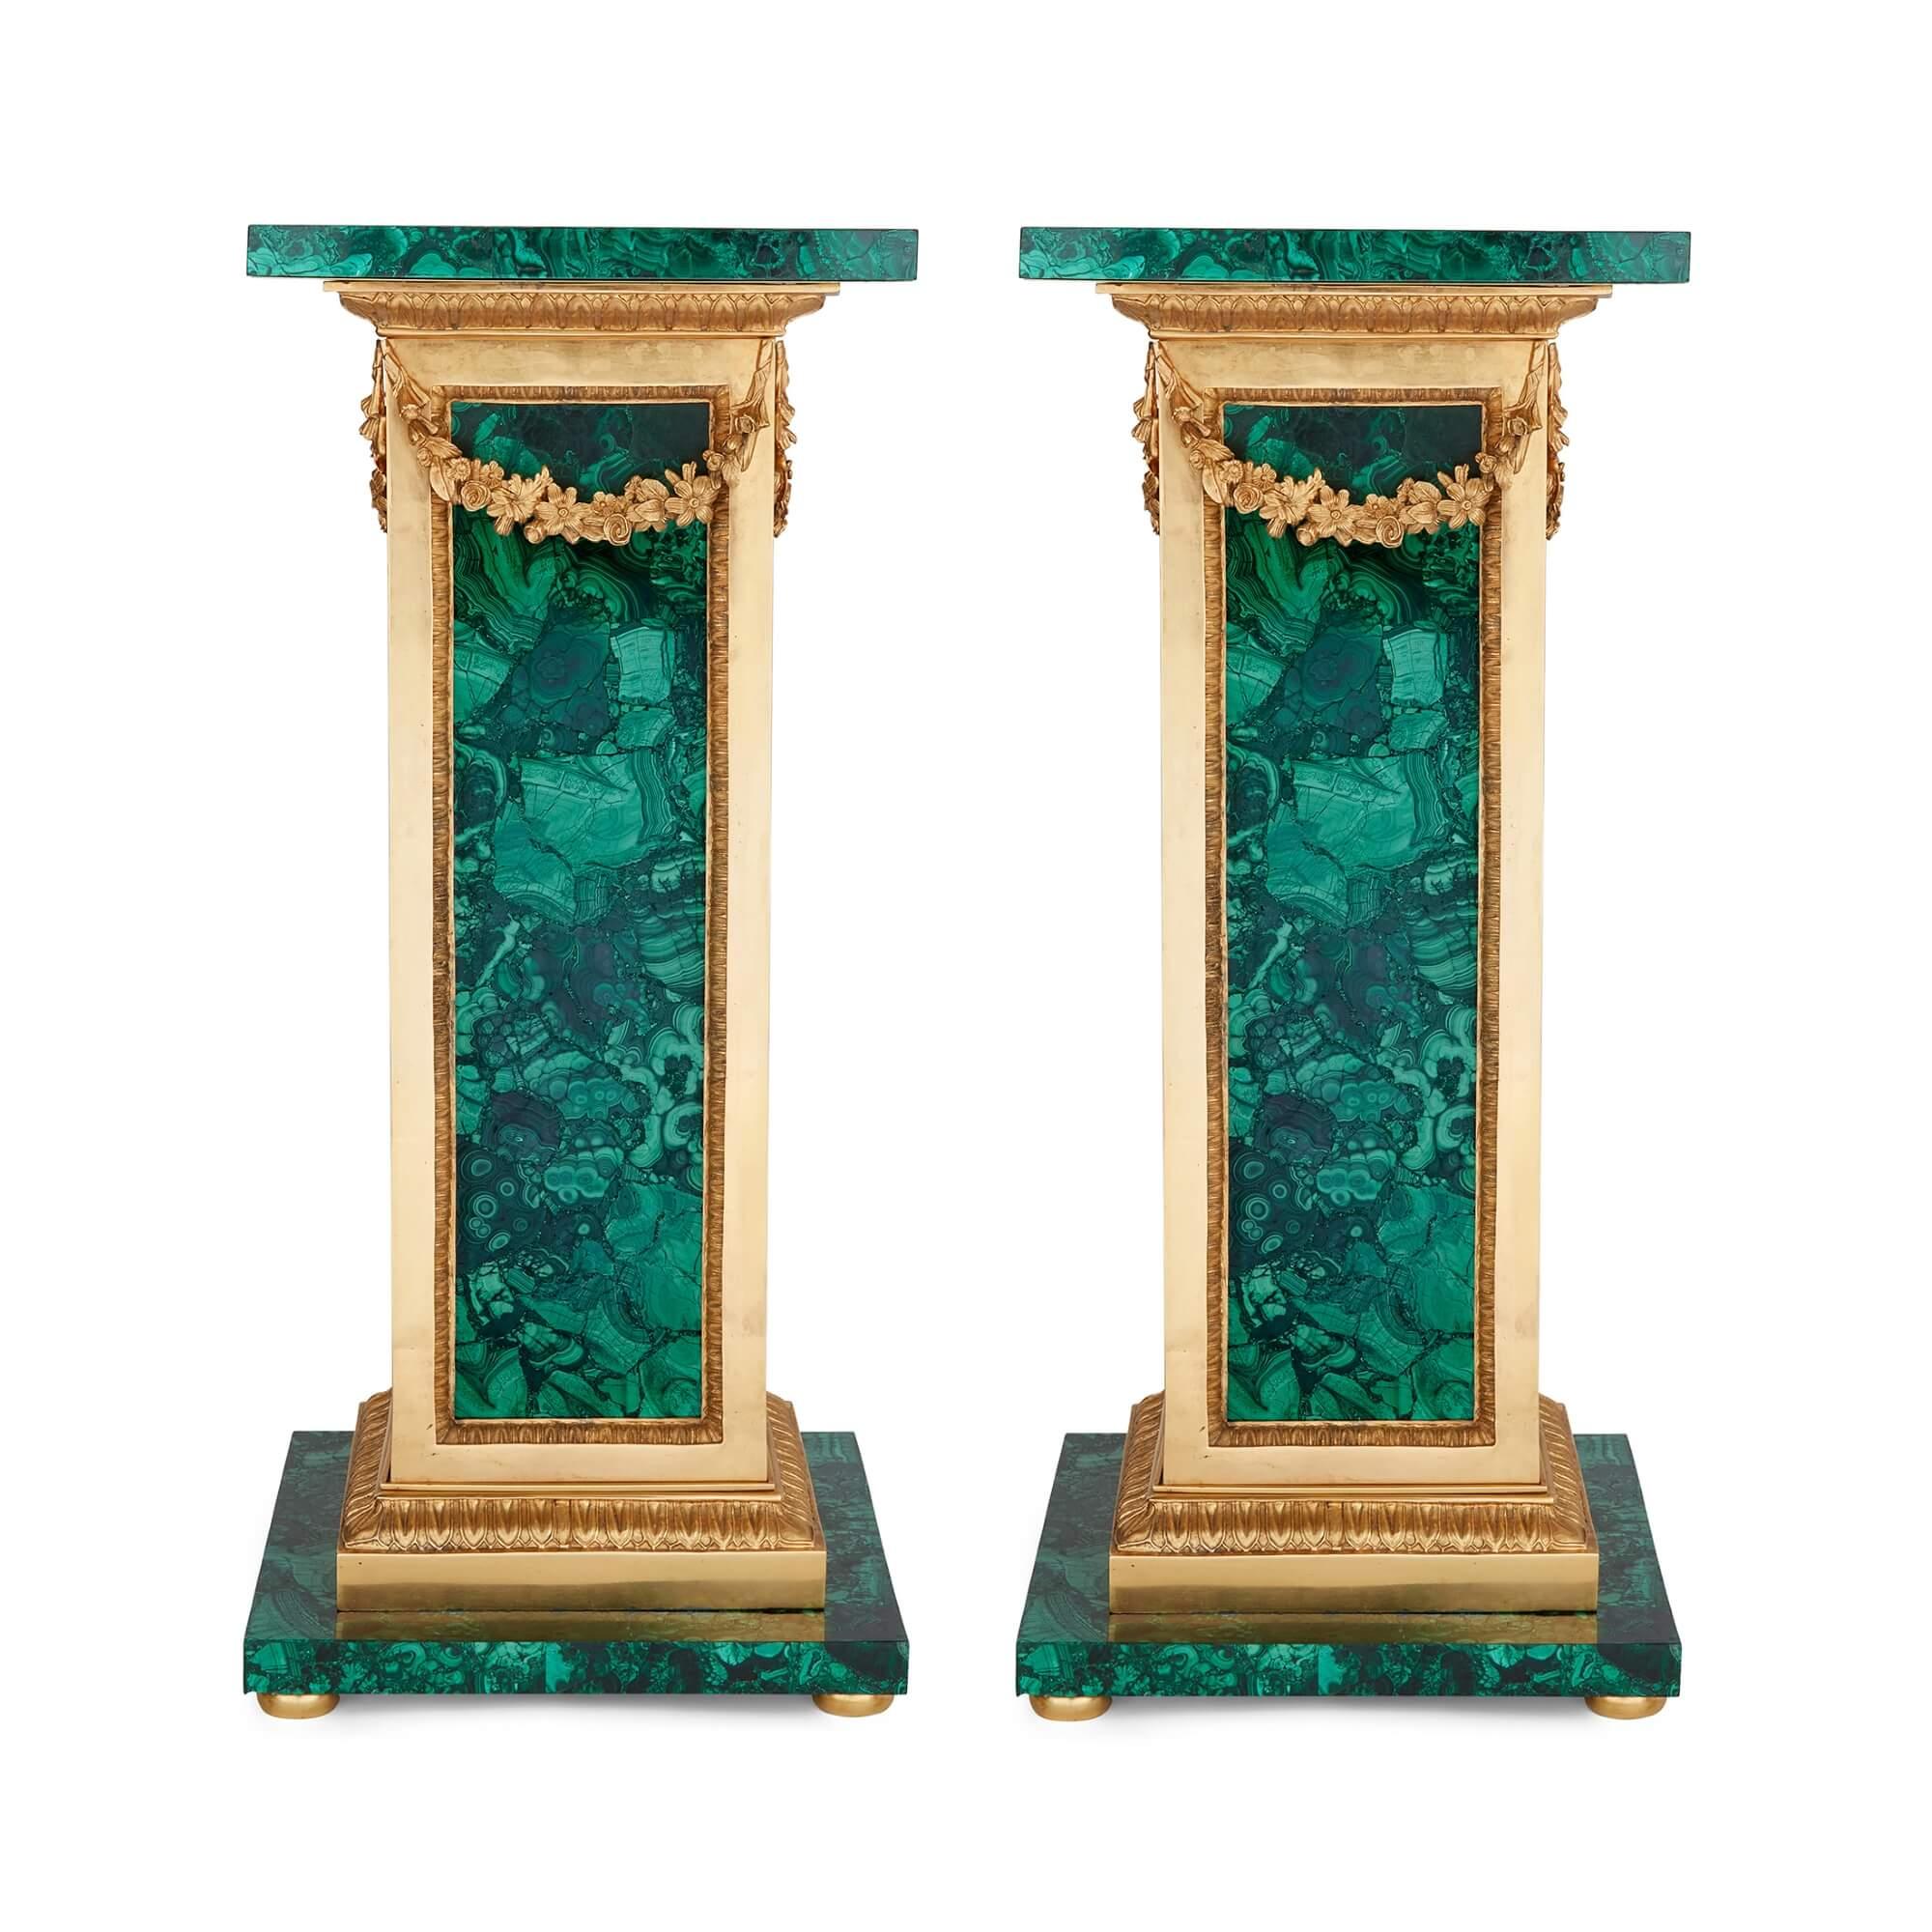 Pair of French malachite and ormolu pedestals 
French, 20th Century
Height 102cm, width 44cm, depth 44cm 

Elegantly mounted with ormolu features and fully covered in malachite, this pair of pedestals is guaranteed to add a touch of elegance to the